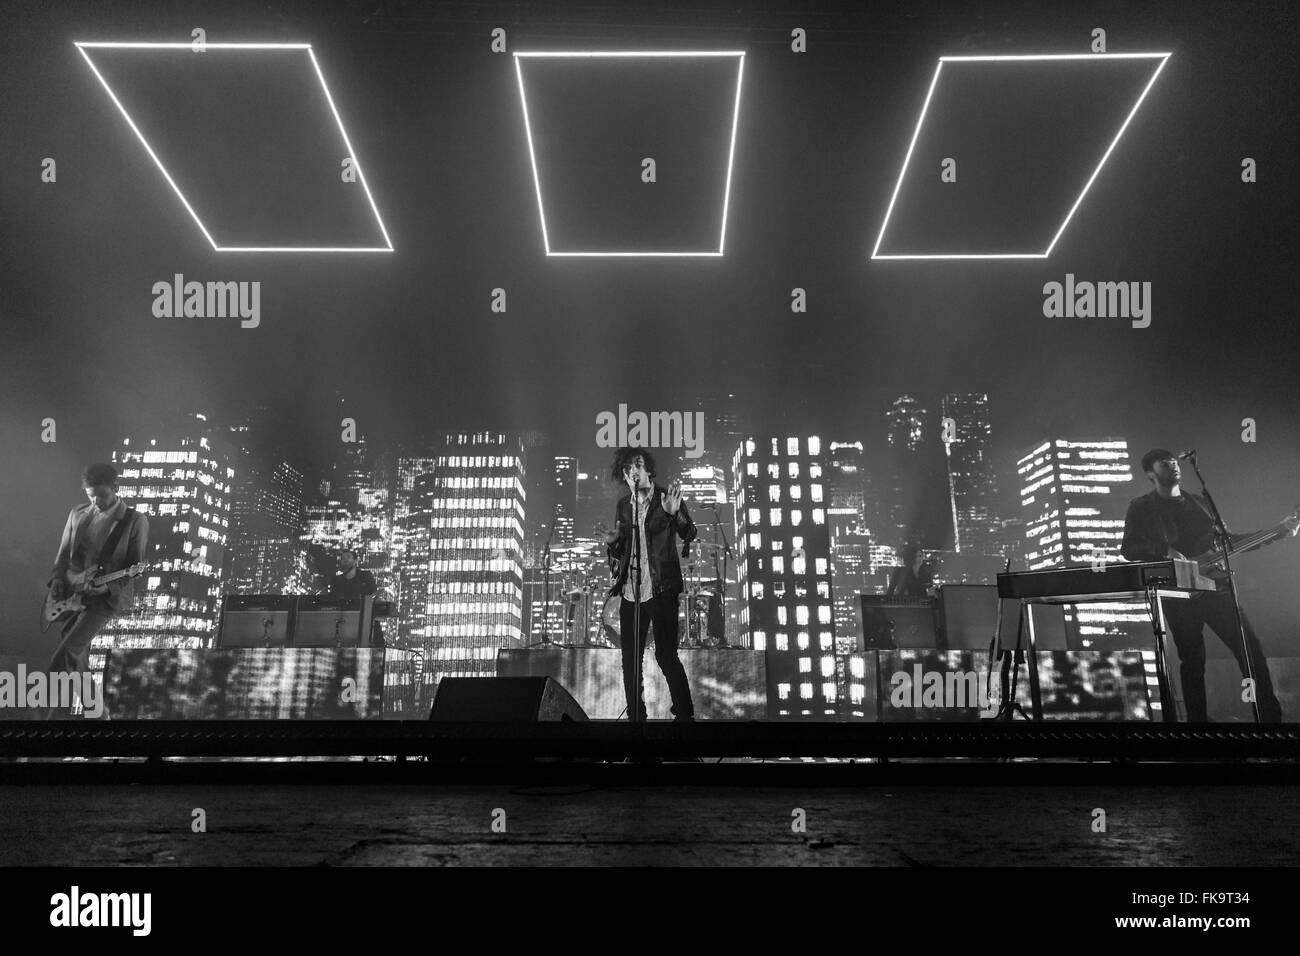 London, UK, 7th March 2016. The 1975 Live Performance at o2 Brixton Academy. © Robert Stainforth/Alamy Live News Stock Photo